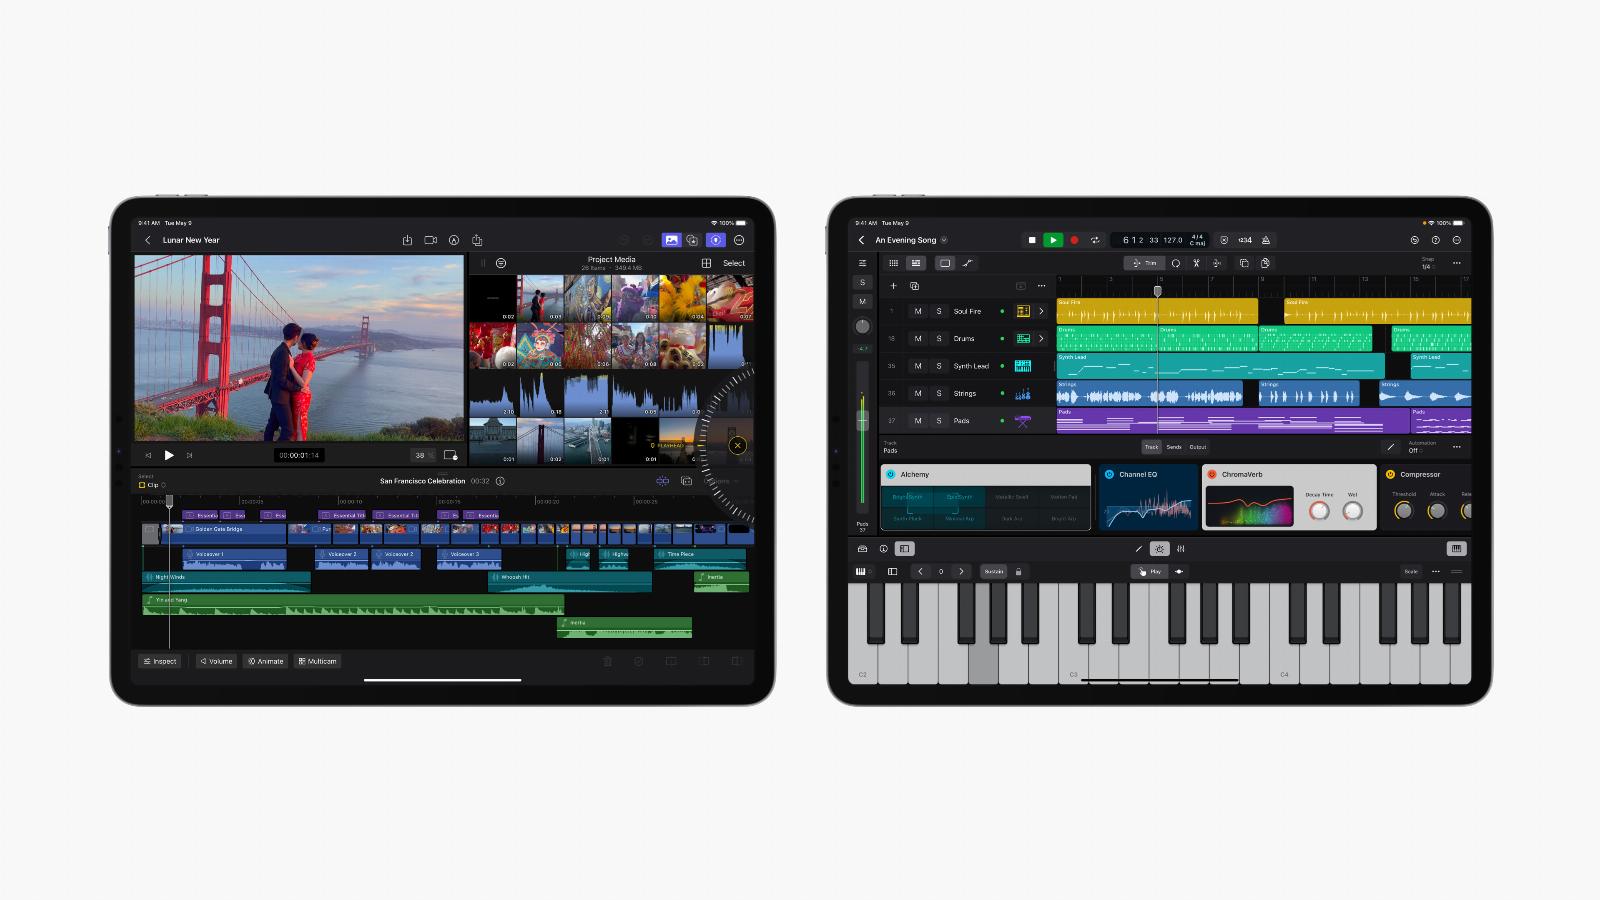 Apple is launching Final Cut Pro and Logic Pro on iPad later this month